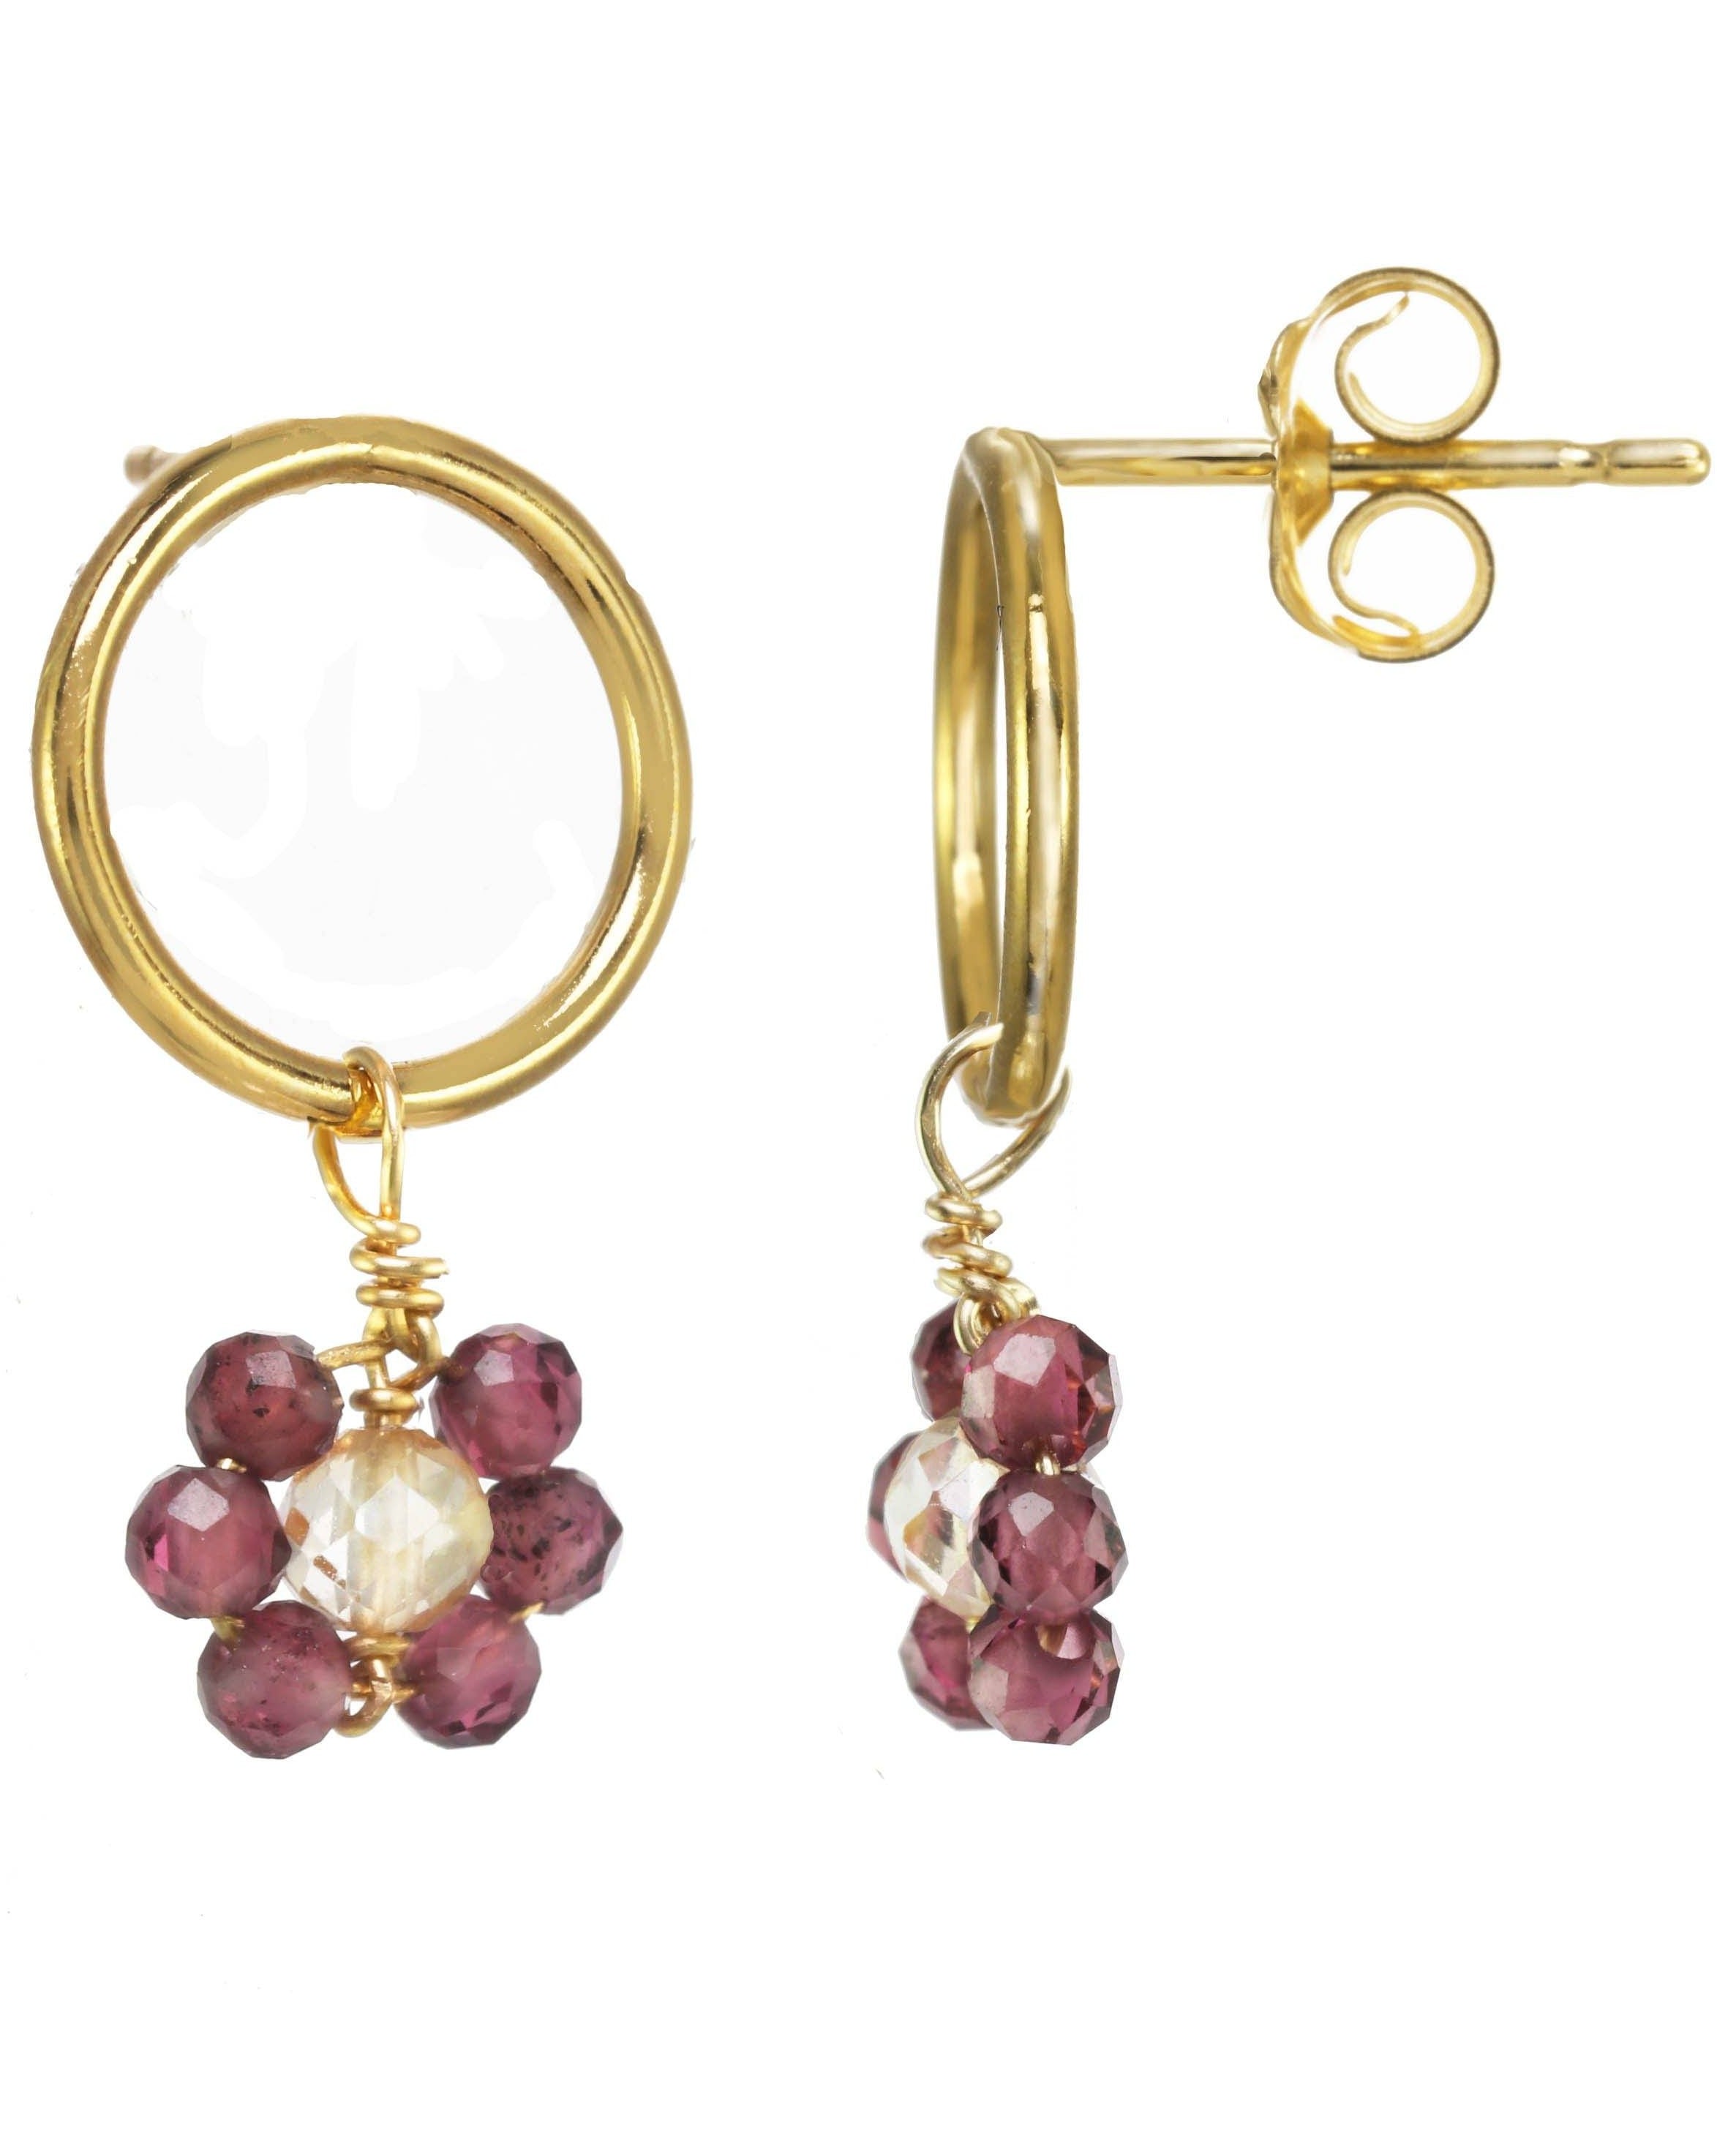 Florcitas Earrings by KOZAKH. 10mm circle studs, crafted in 14K Gold Filled, featuring 2mm Garnet gems and 3mm Imperial Topaz forming a daisy.